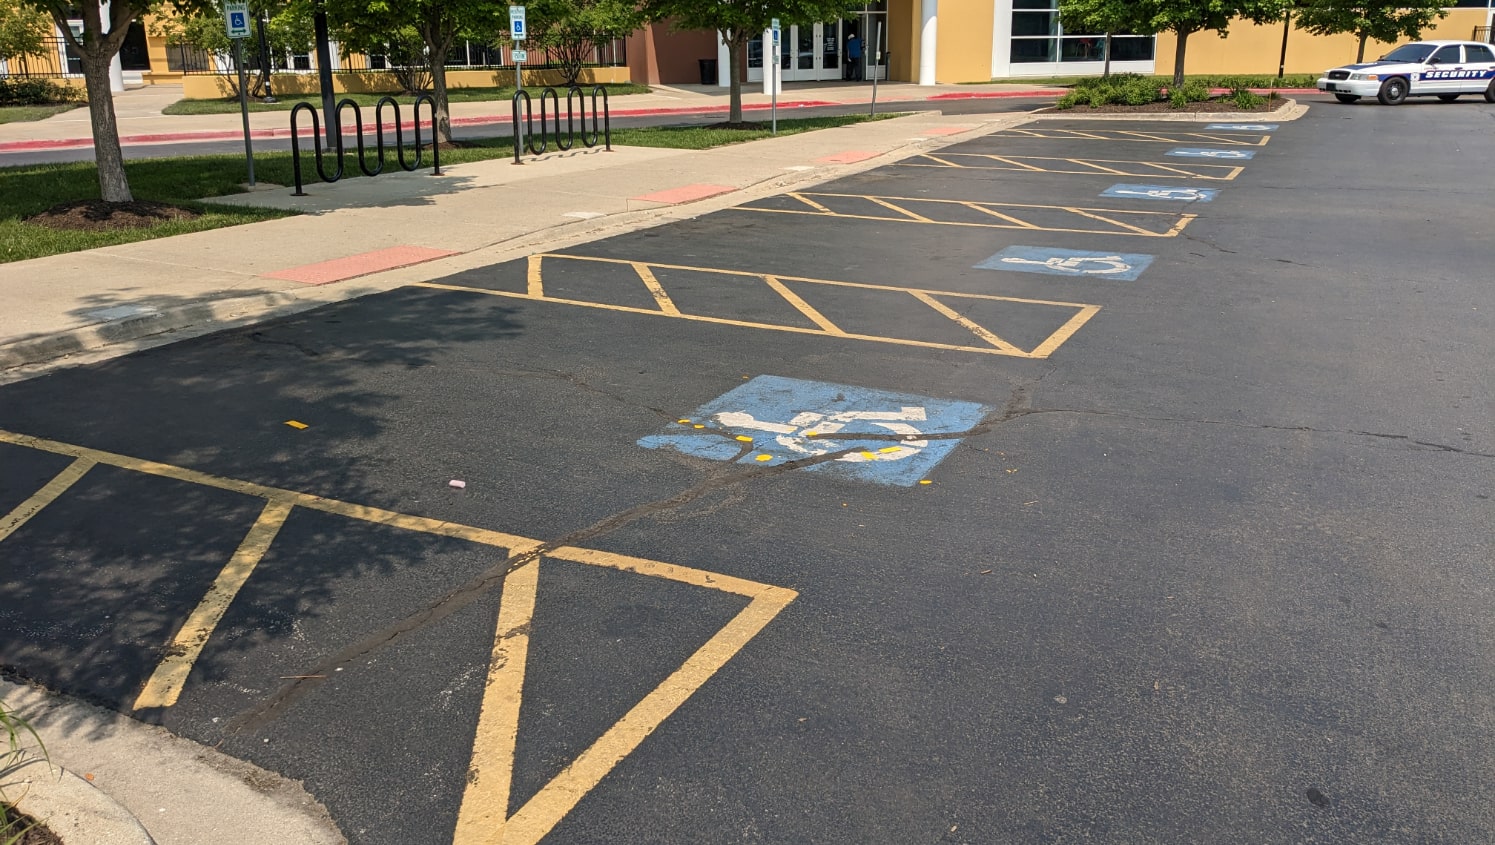 worn handicapped parking spaces awaiting repainting